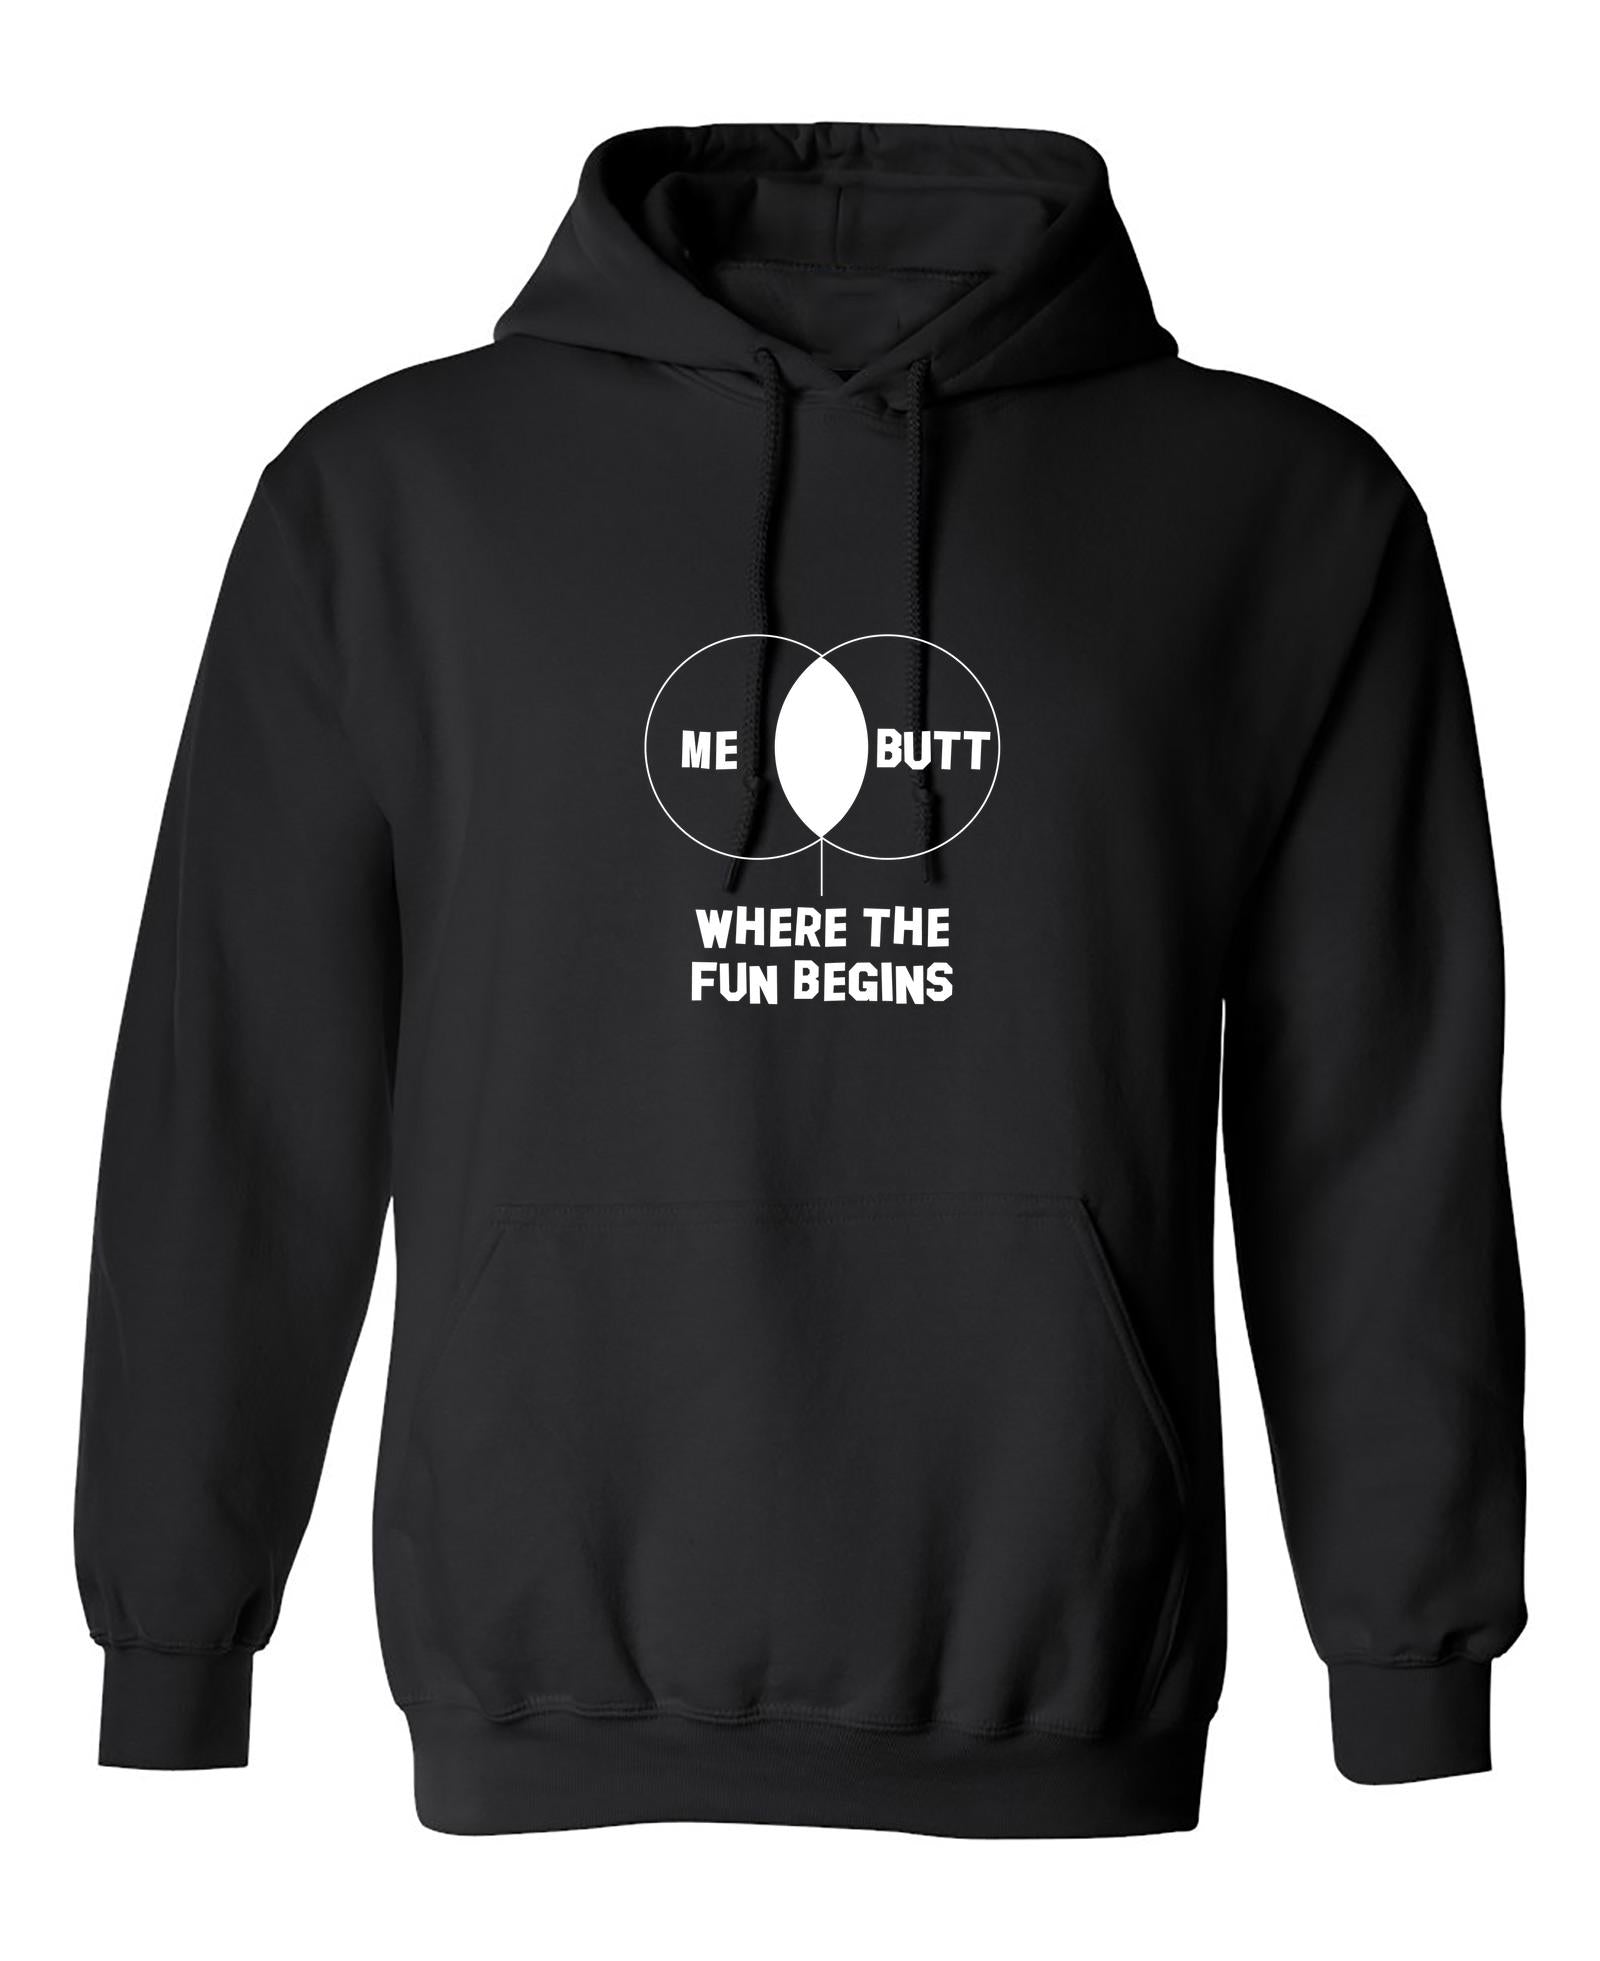 Funny T-Shirts design "Me Butt where the fun begins"